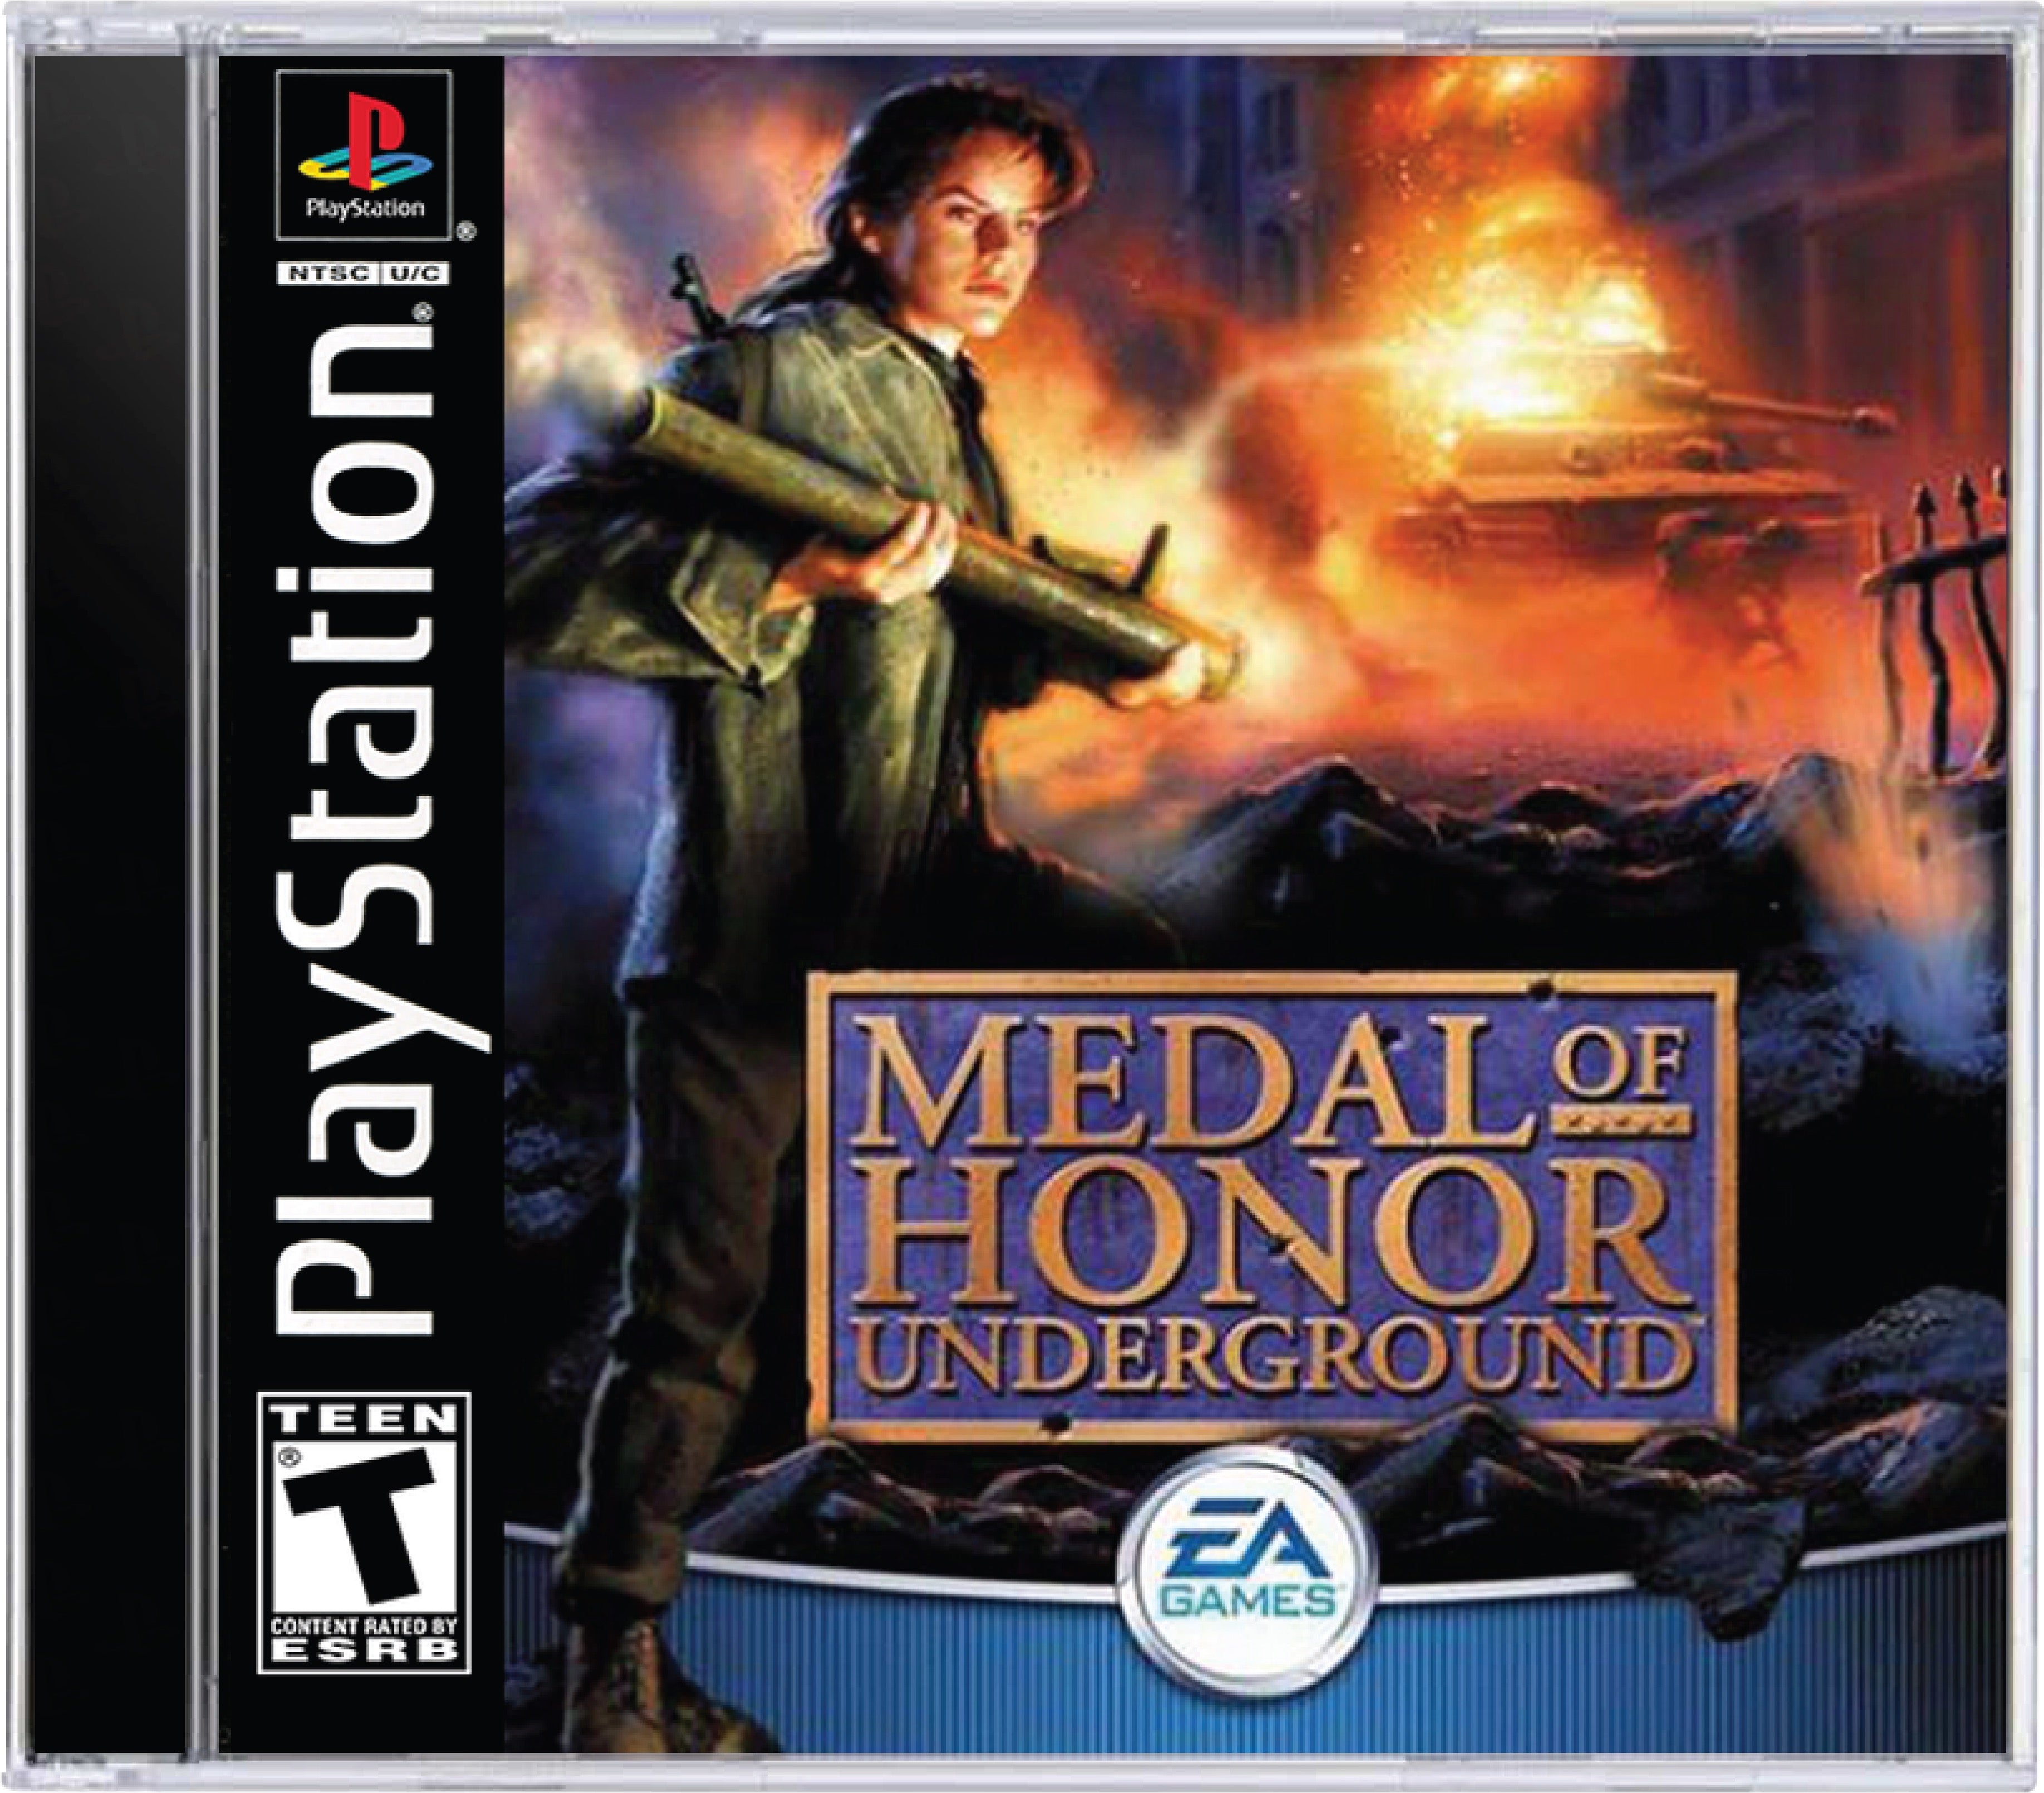 Medal of Honor Underground Cover Art and Product Photo